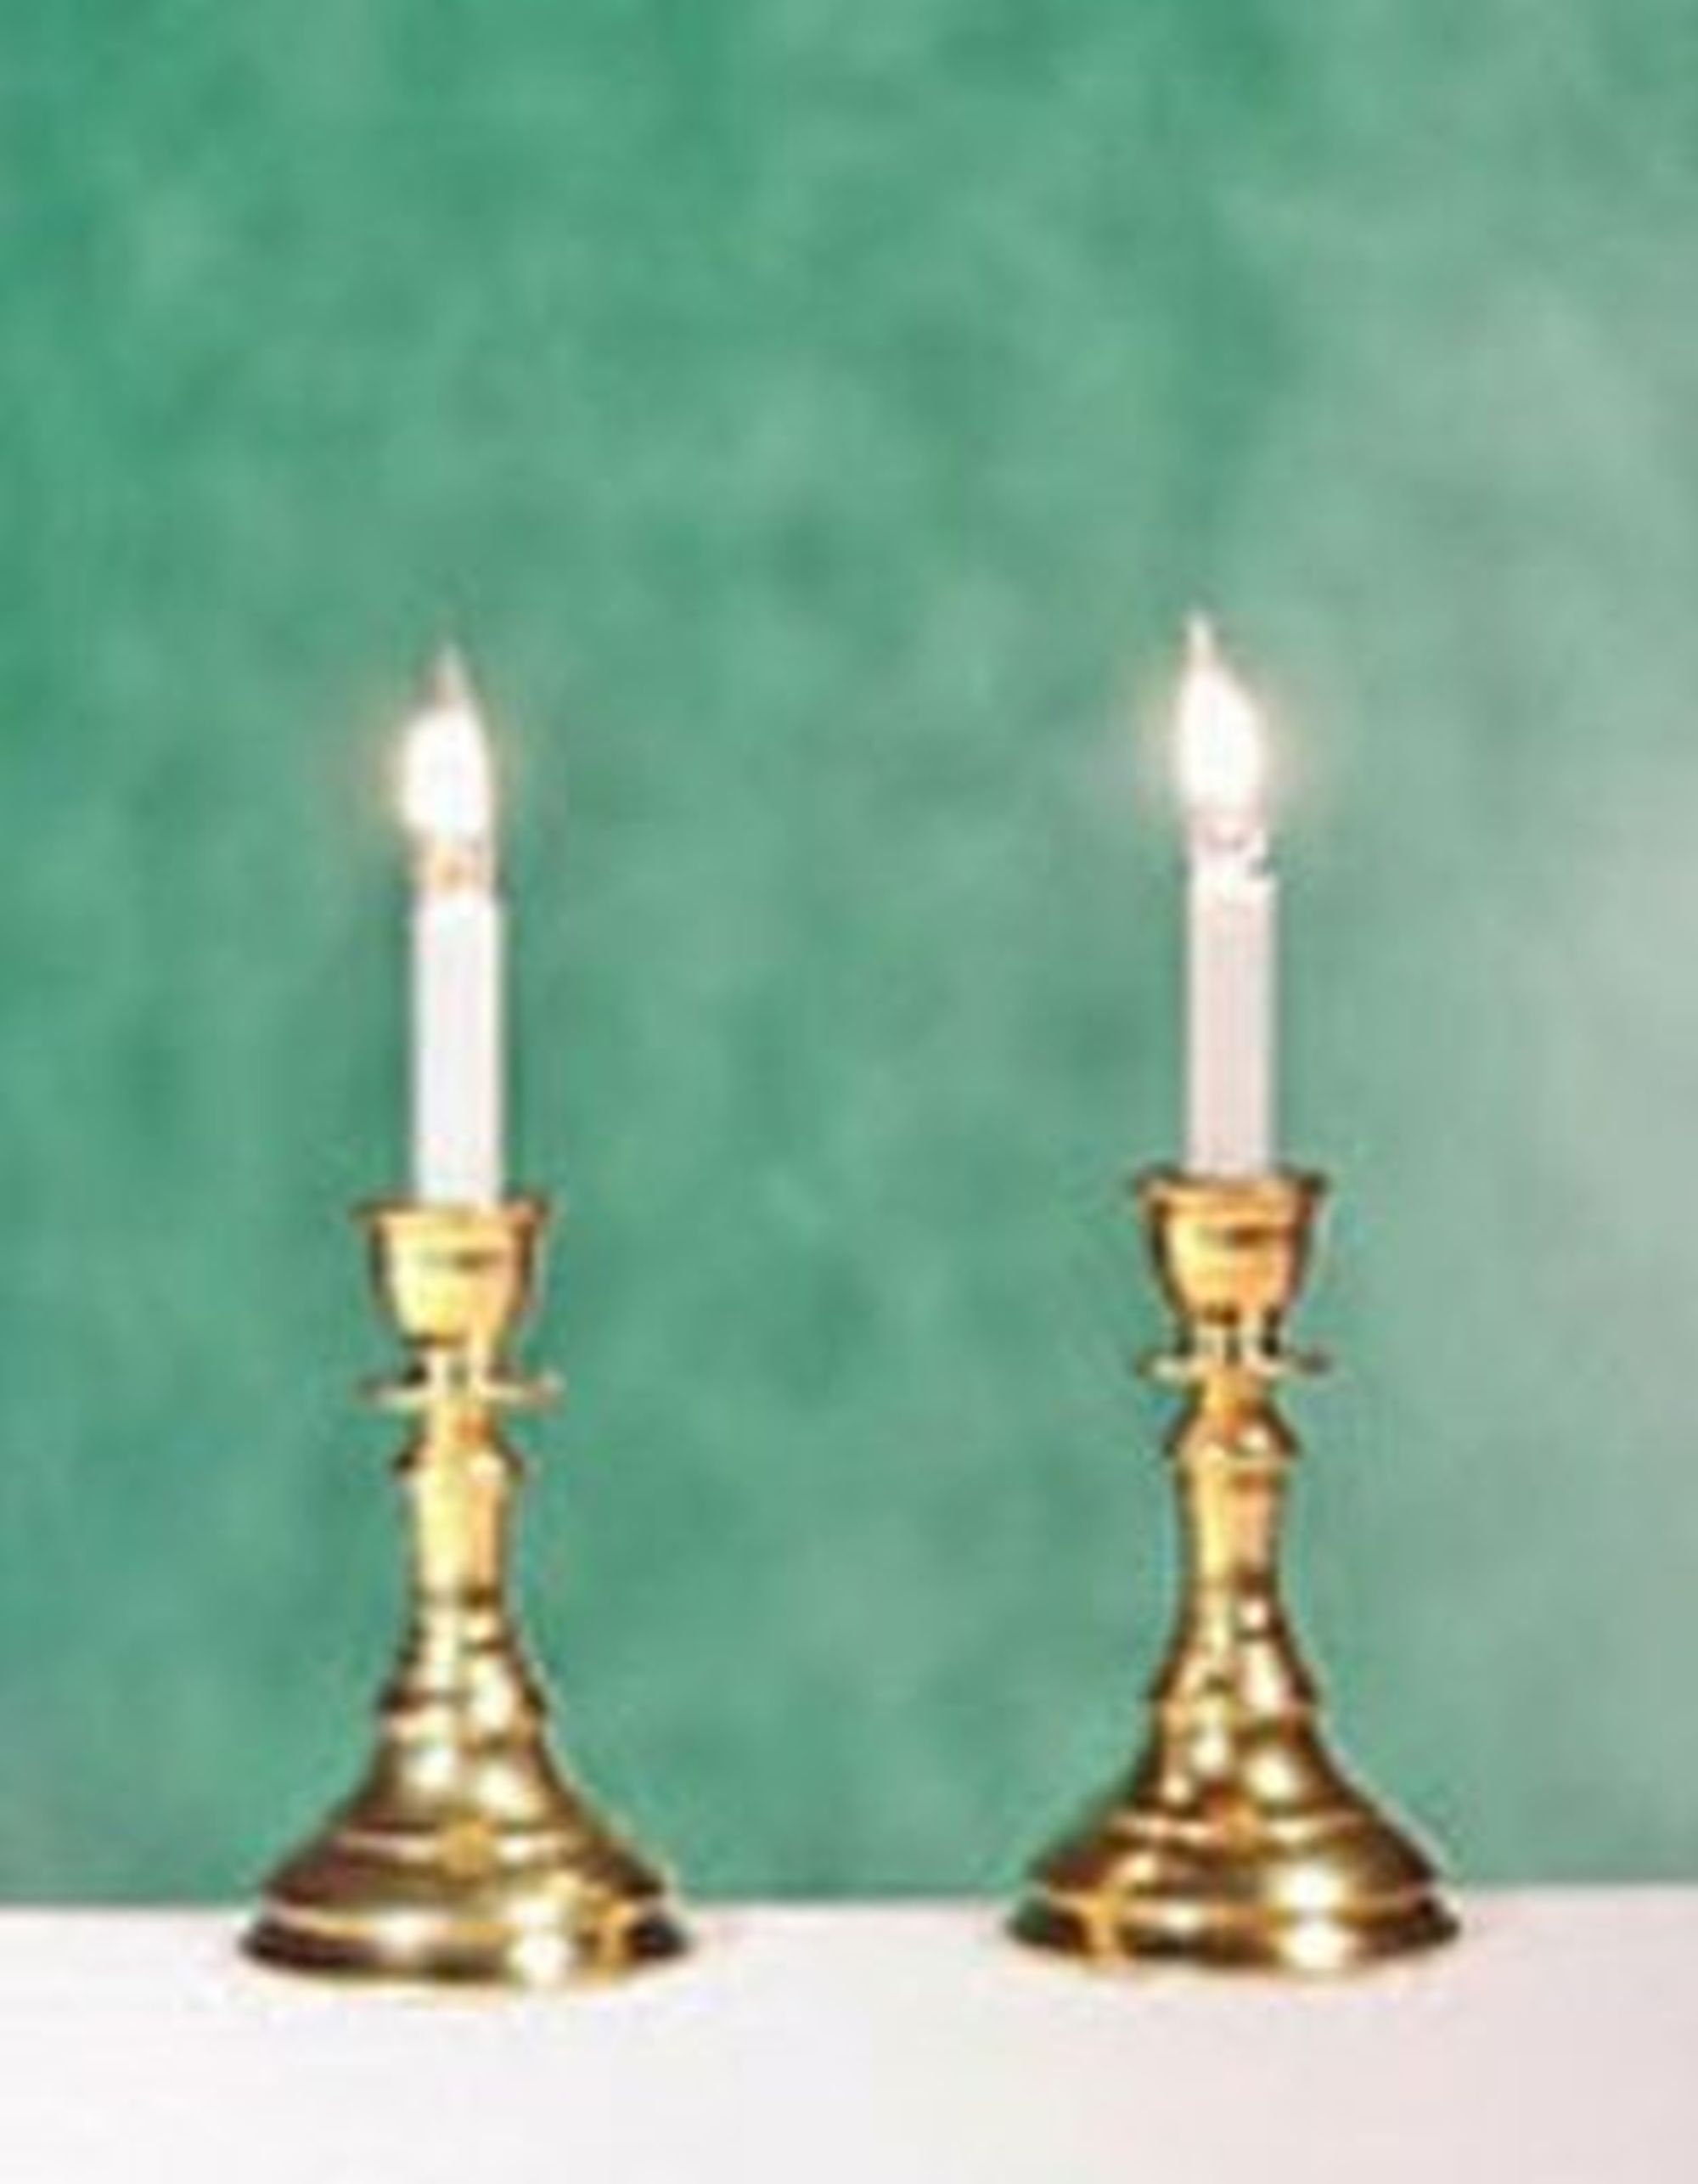 Candlesticks Brass 2202-111 1/12 scale dollhouse miniature by Clare-Bell 1 set 